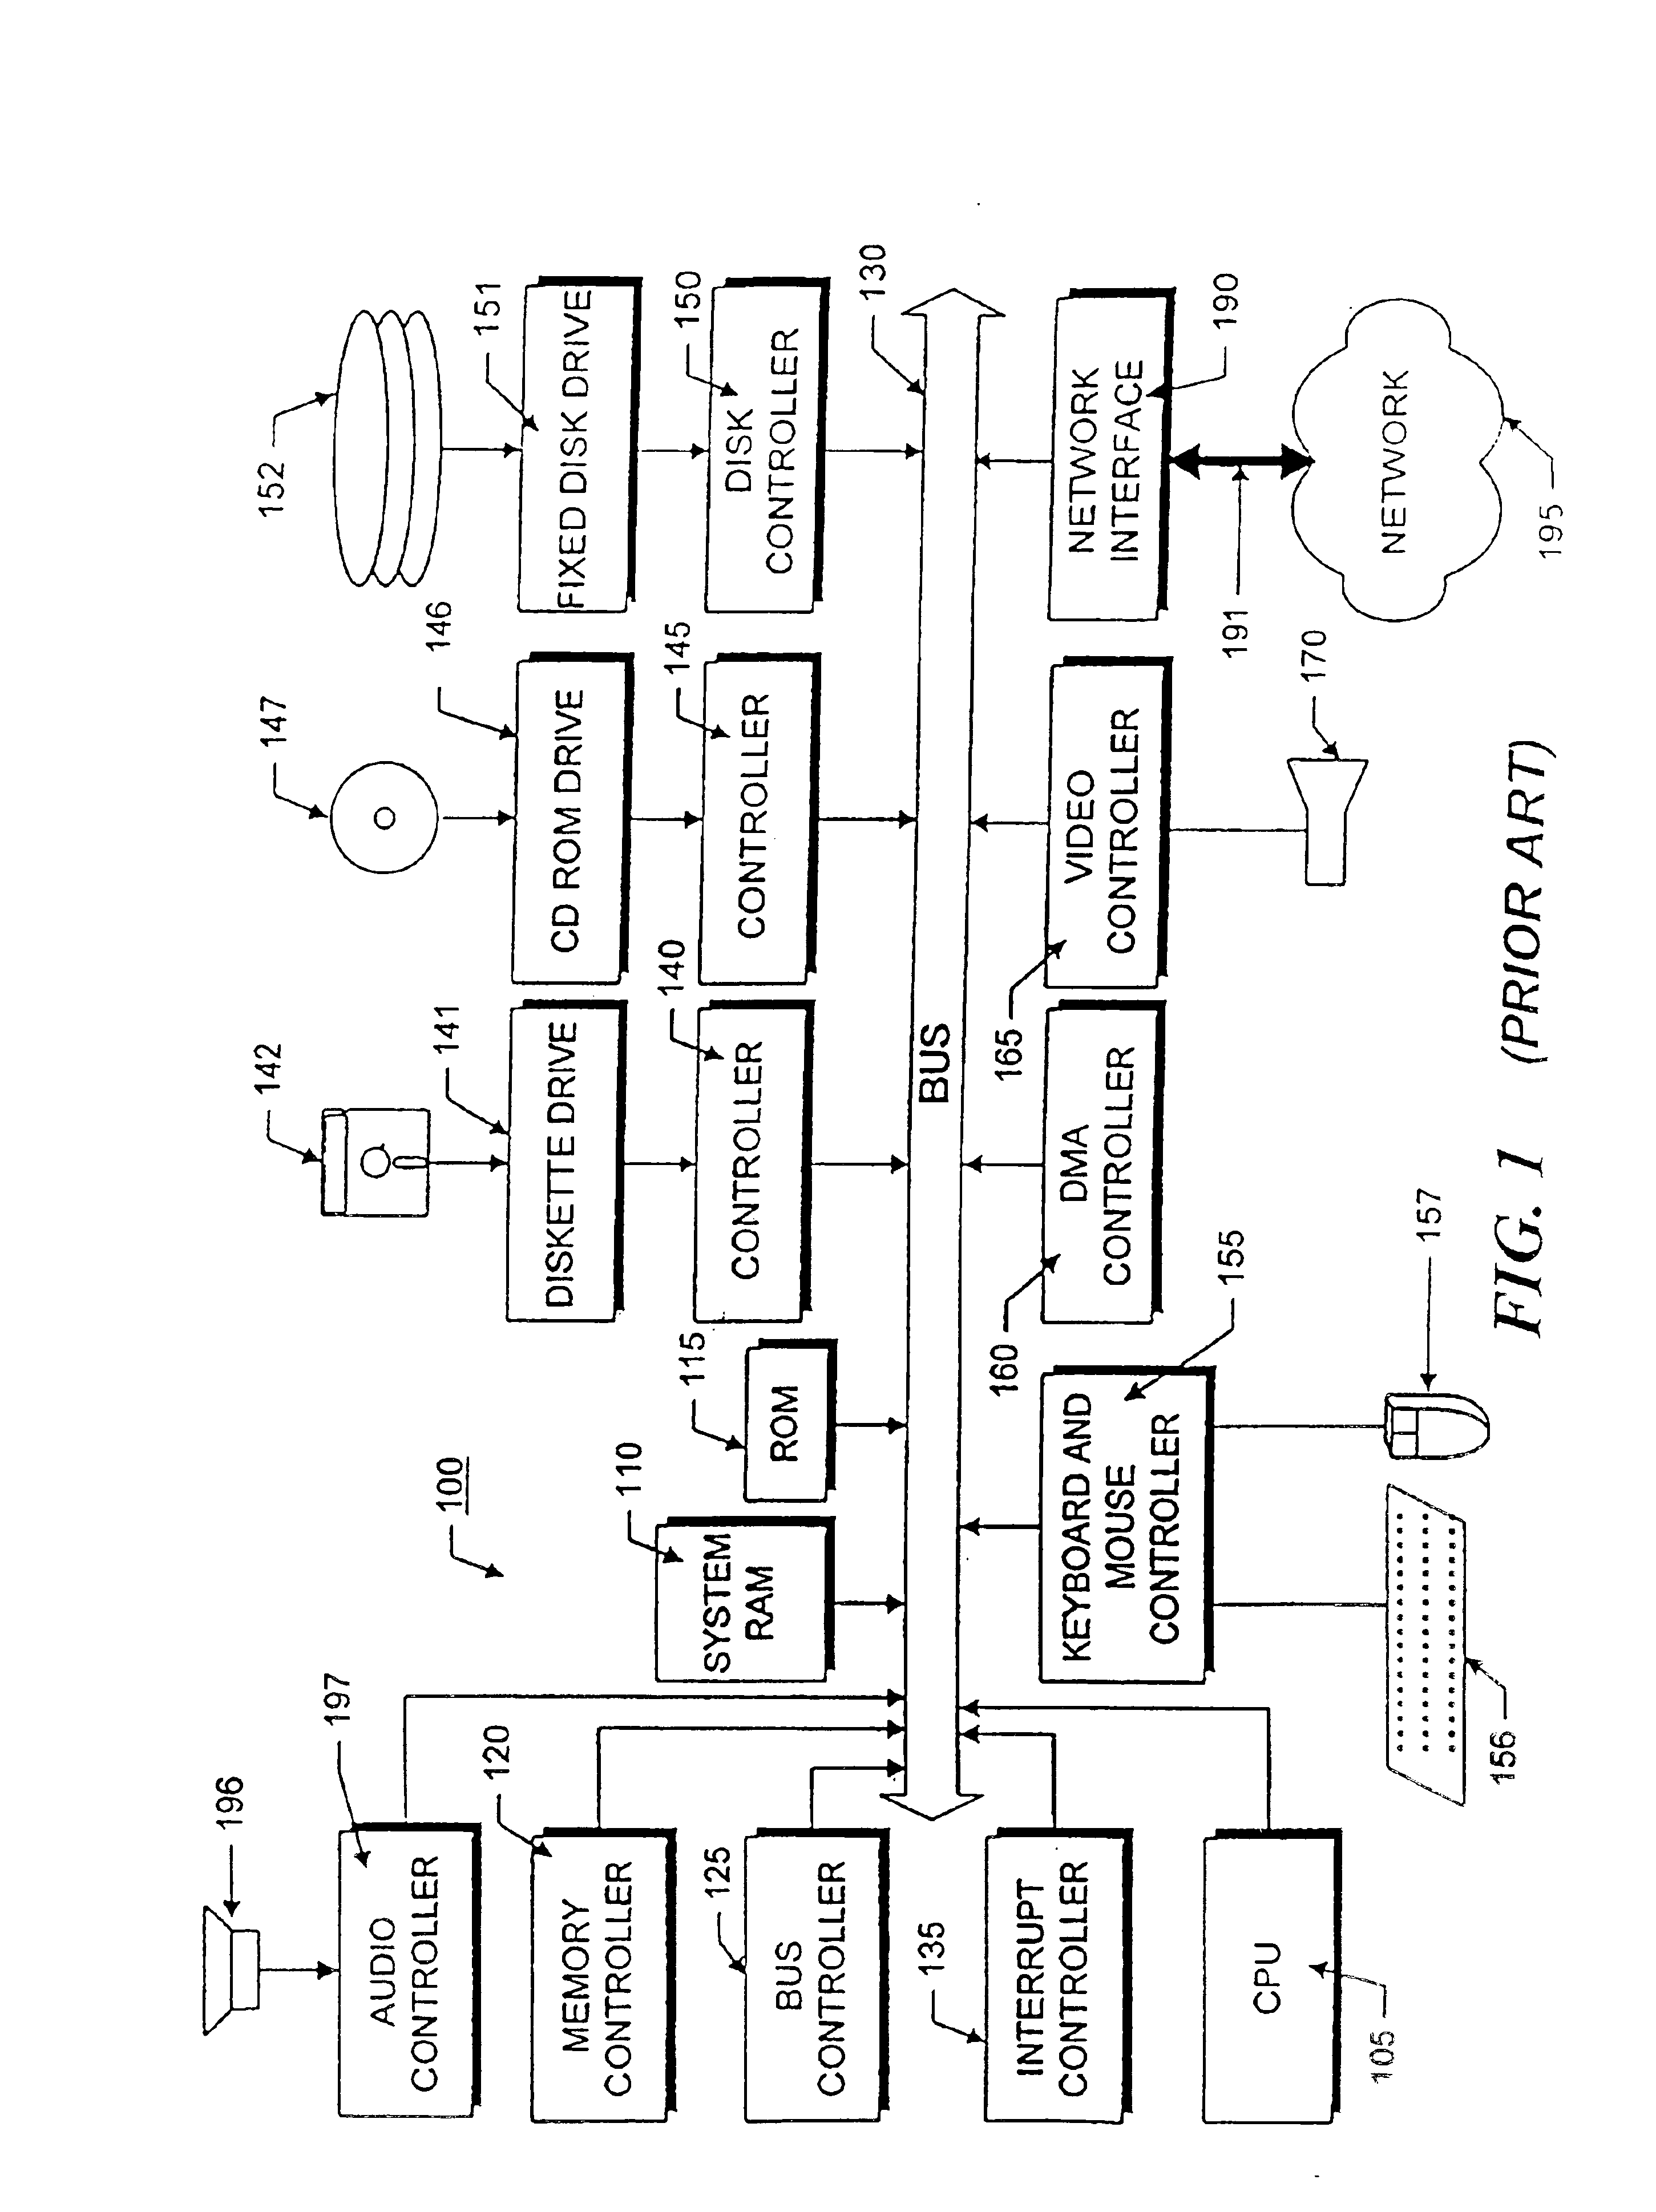 Method and apparatus for prioritizing data change requests and maintaining data consistency in a distributed computer system equipped for activity-based collaboration